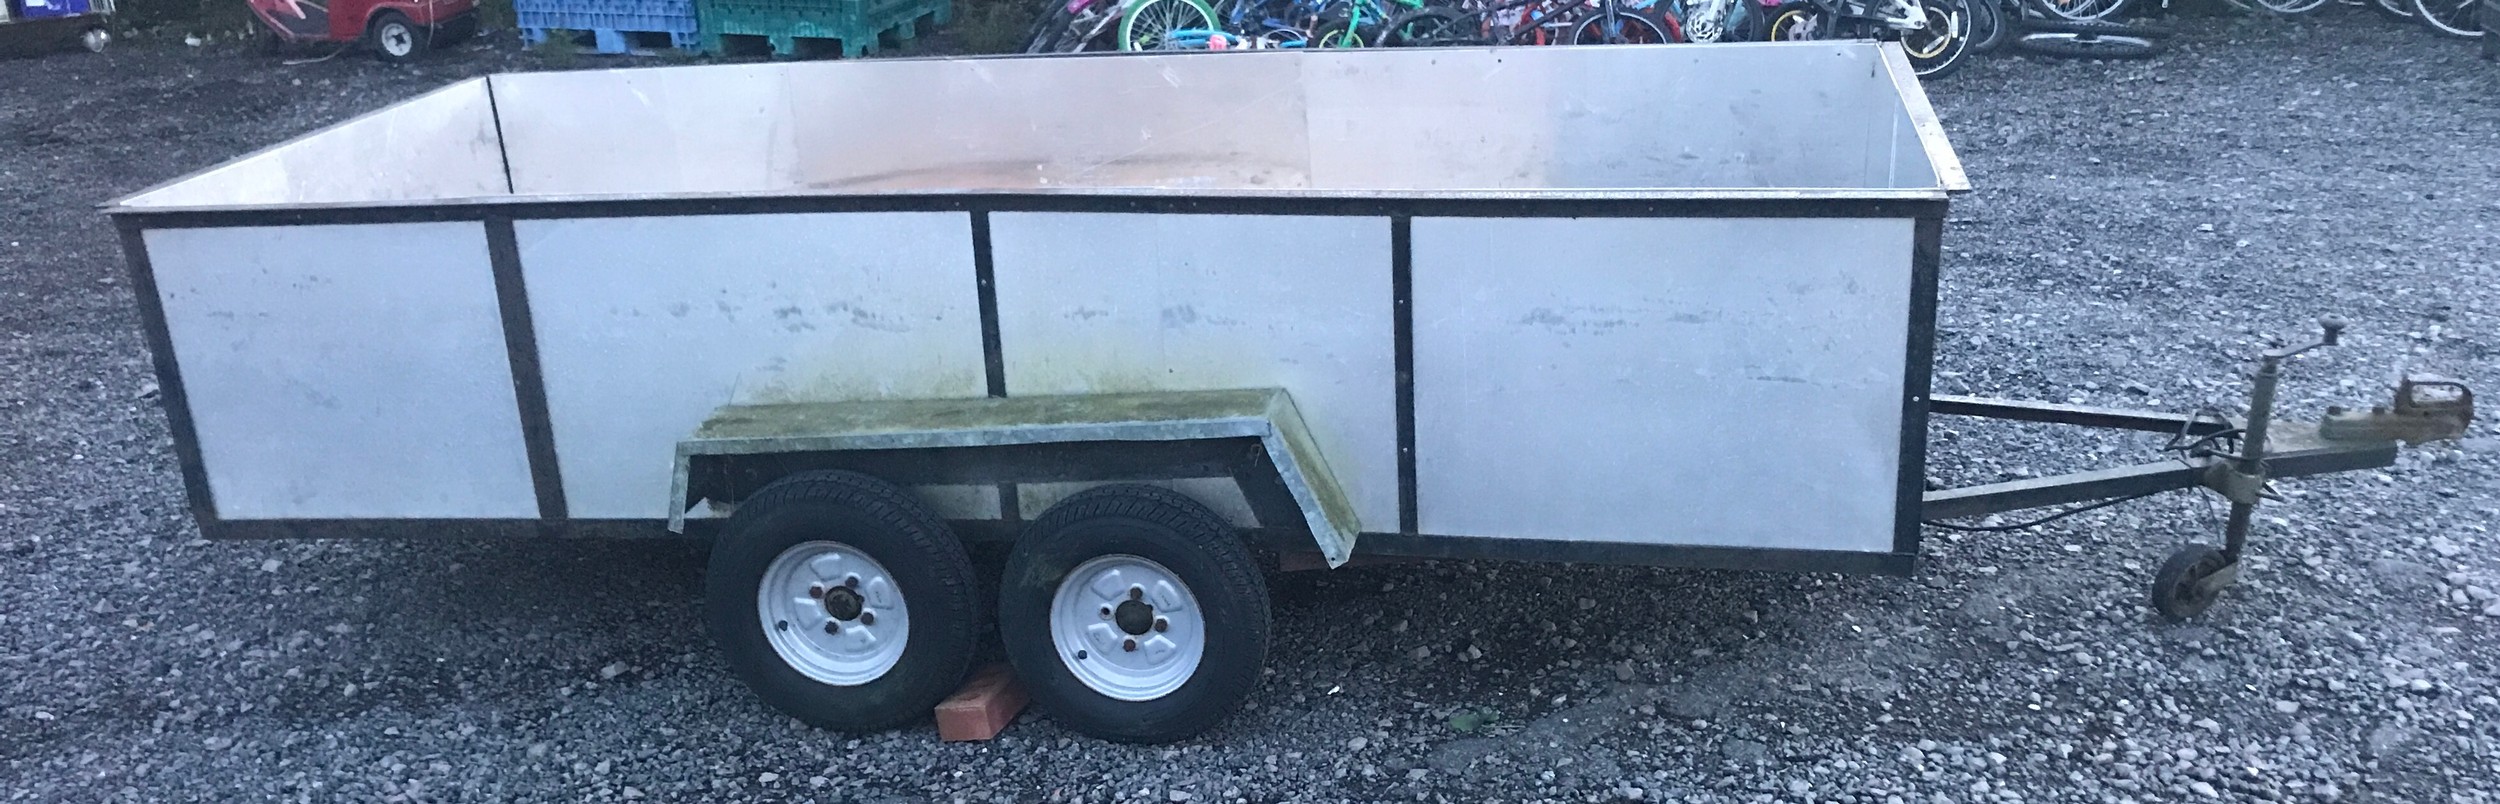 Twin axle trailer with sides, 129.5 inches in length, Width 56 inches, overall length with crow